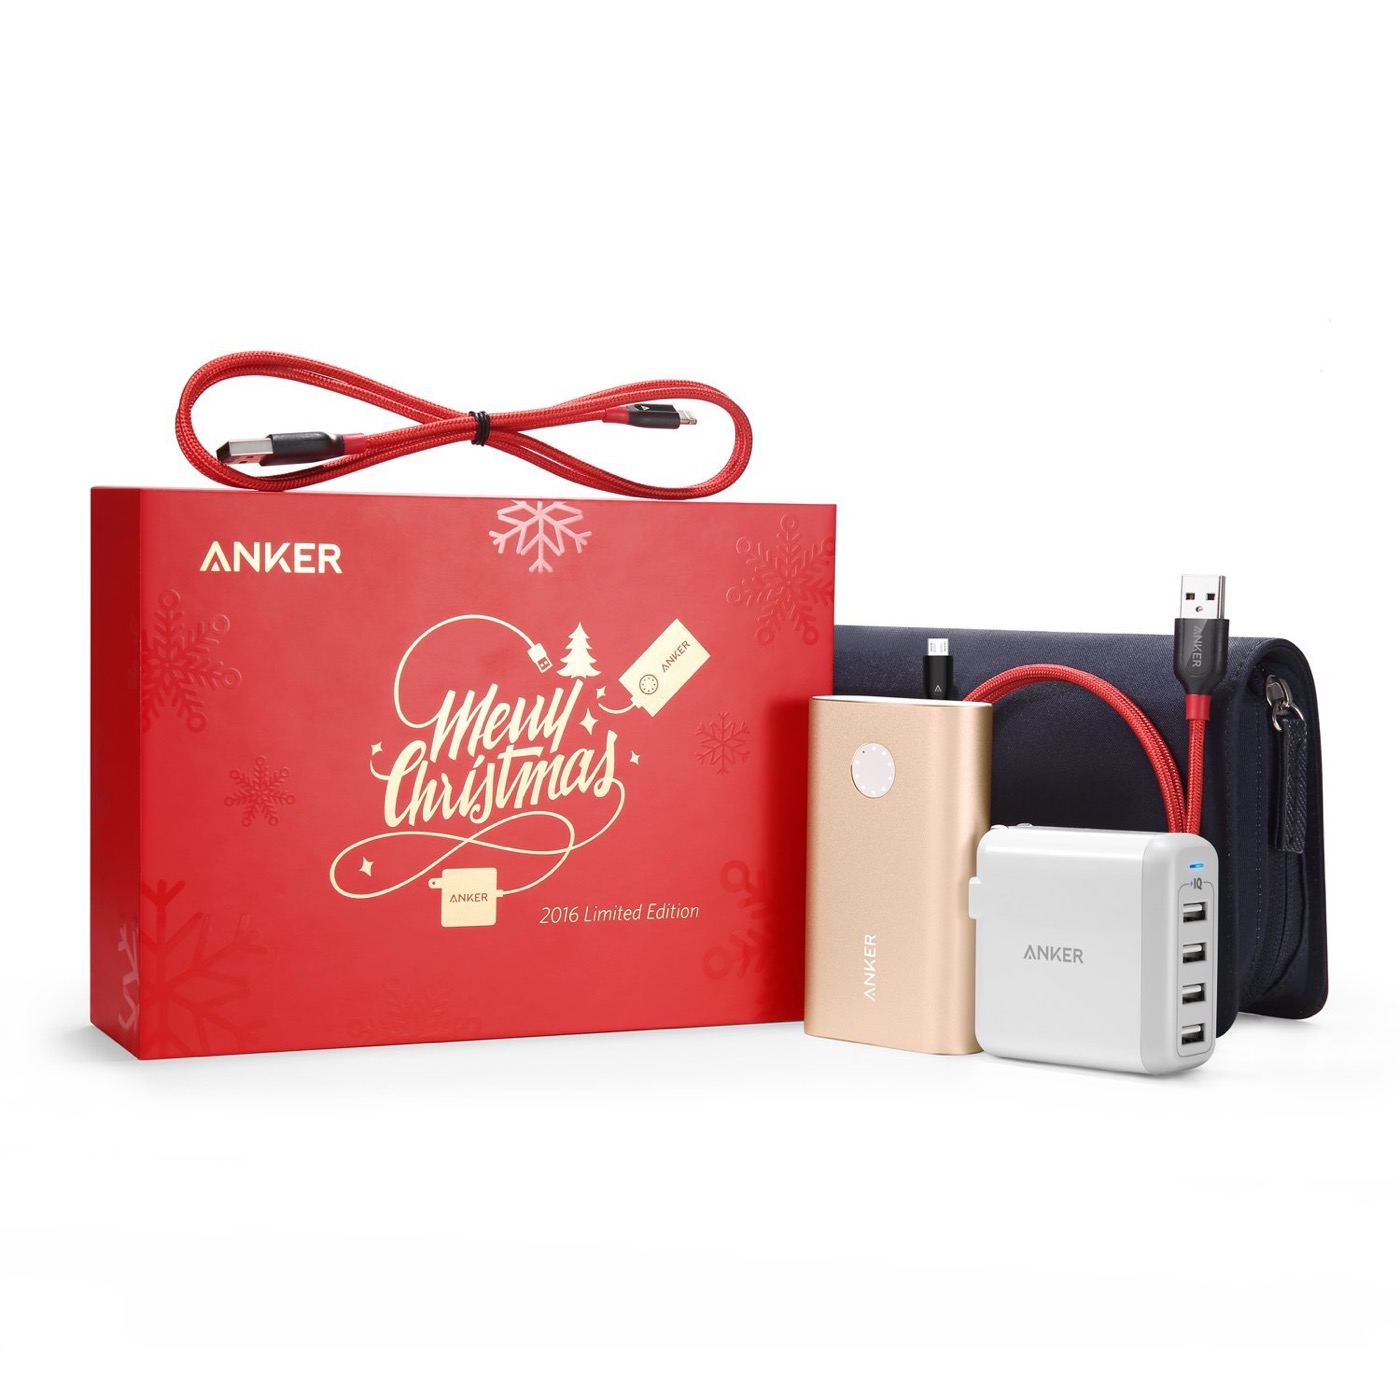 Anker、クリスマスのプレゼントに最適な｢Anker Christmas PowerPack｣を数量限定で発売 − バッテリーや高速充電器